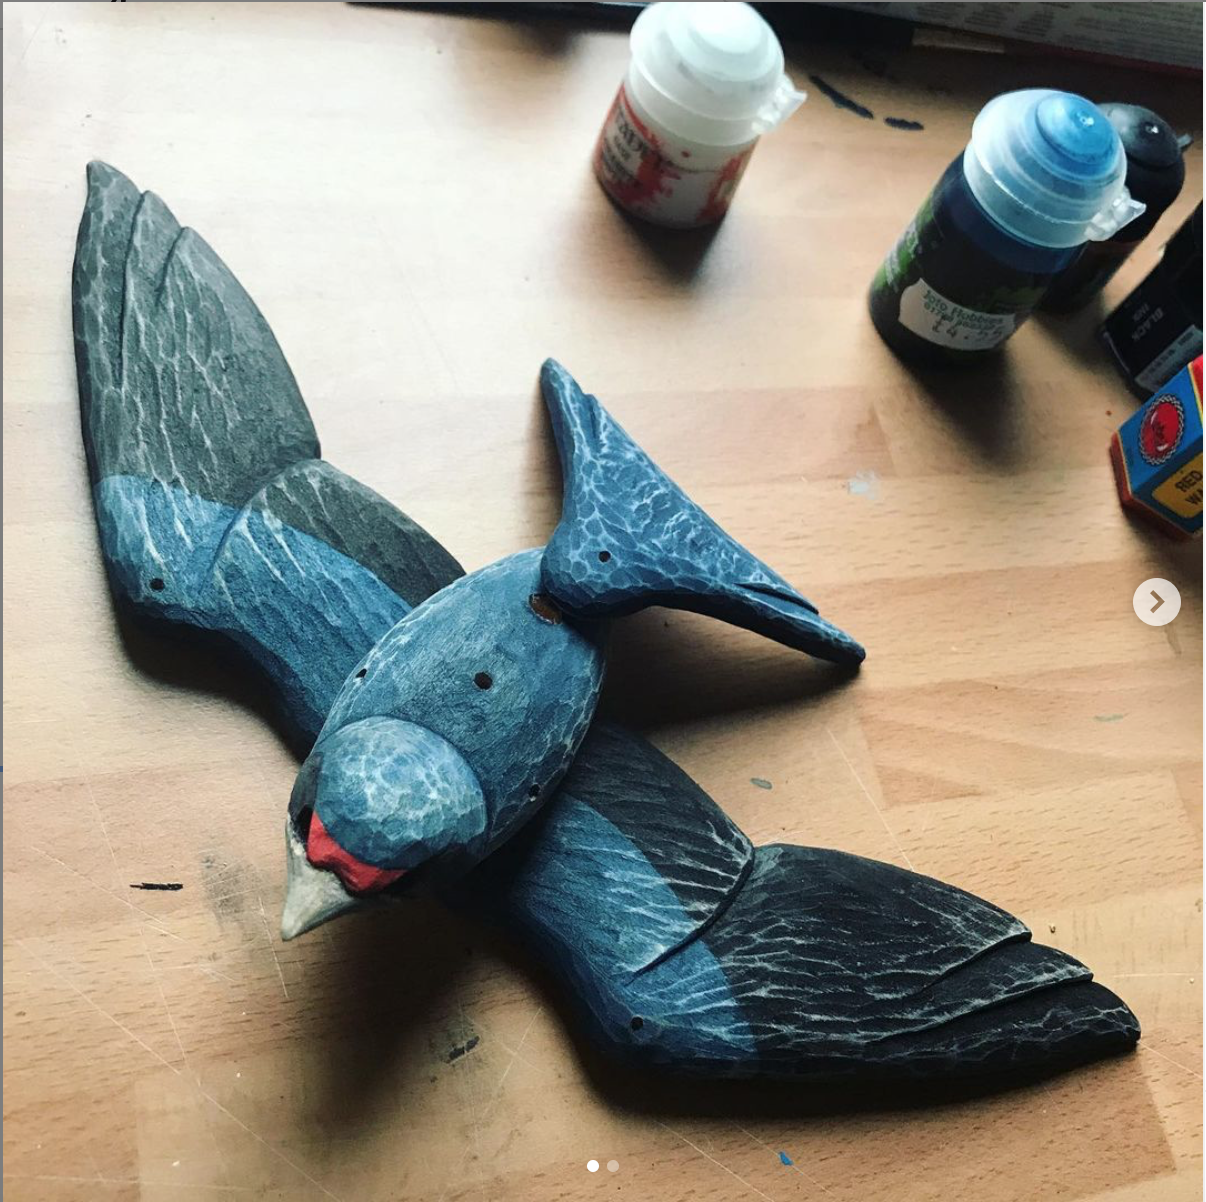  Swallow carved by a tutorial participant, January 2021 